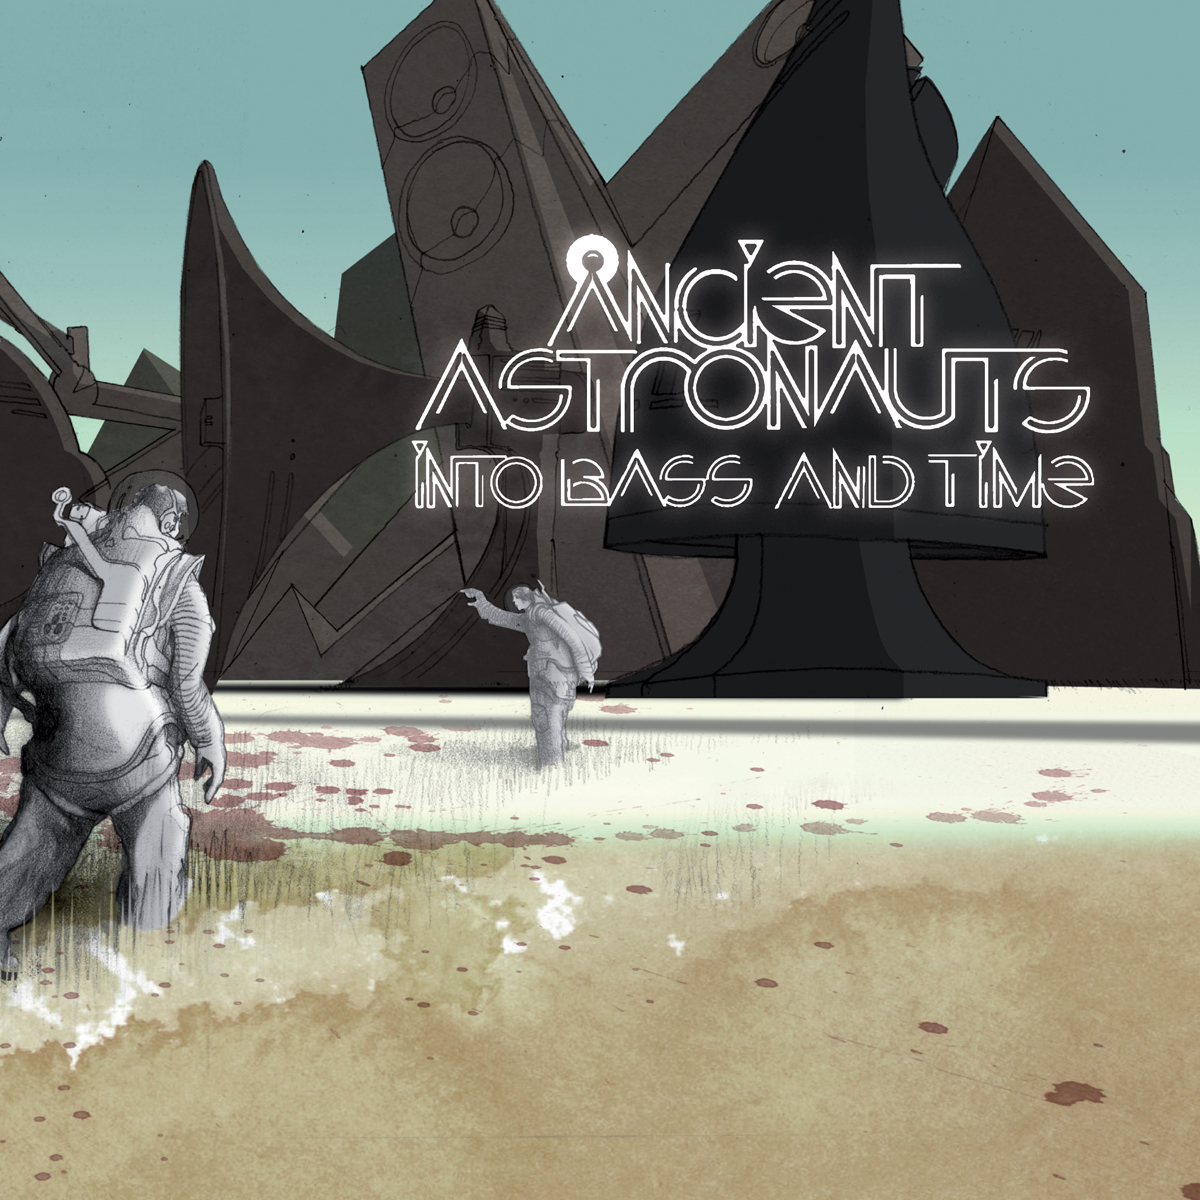 Ancient Astronauts - Impossible